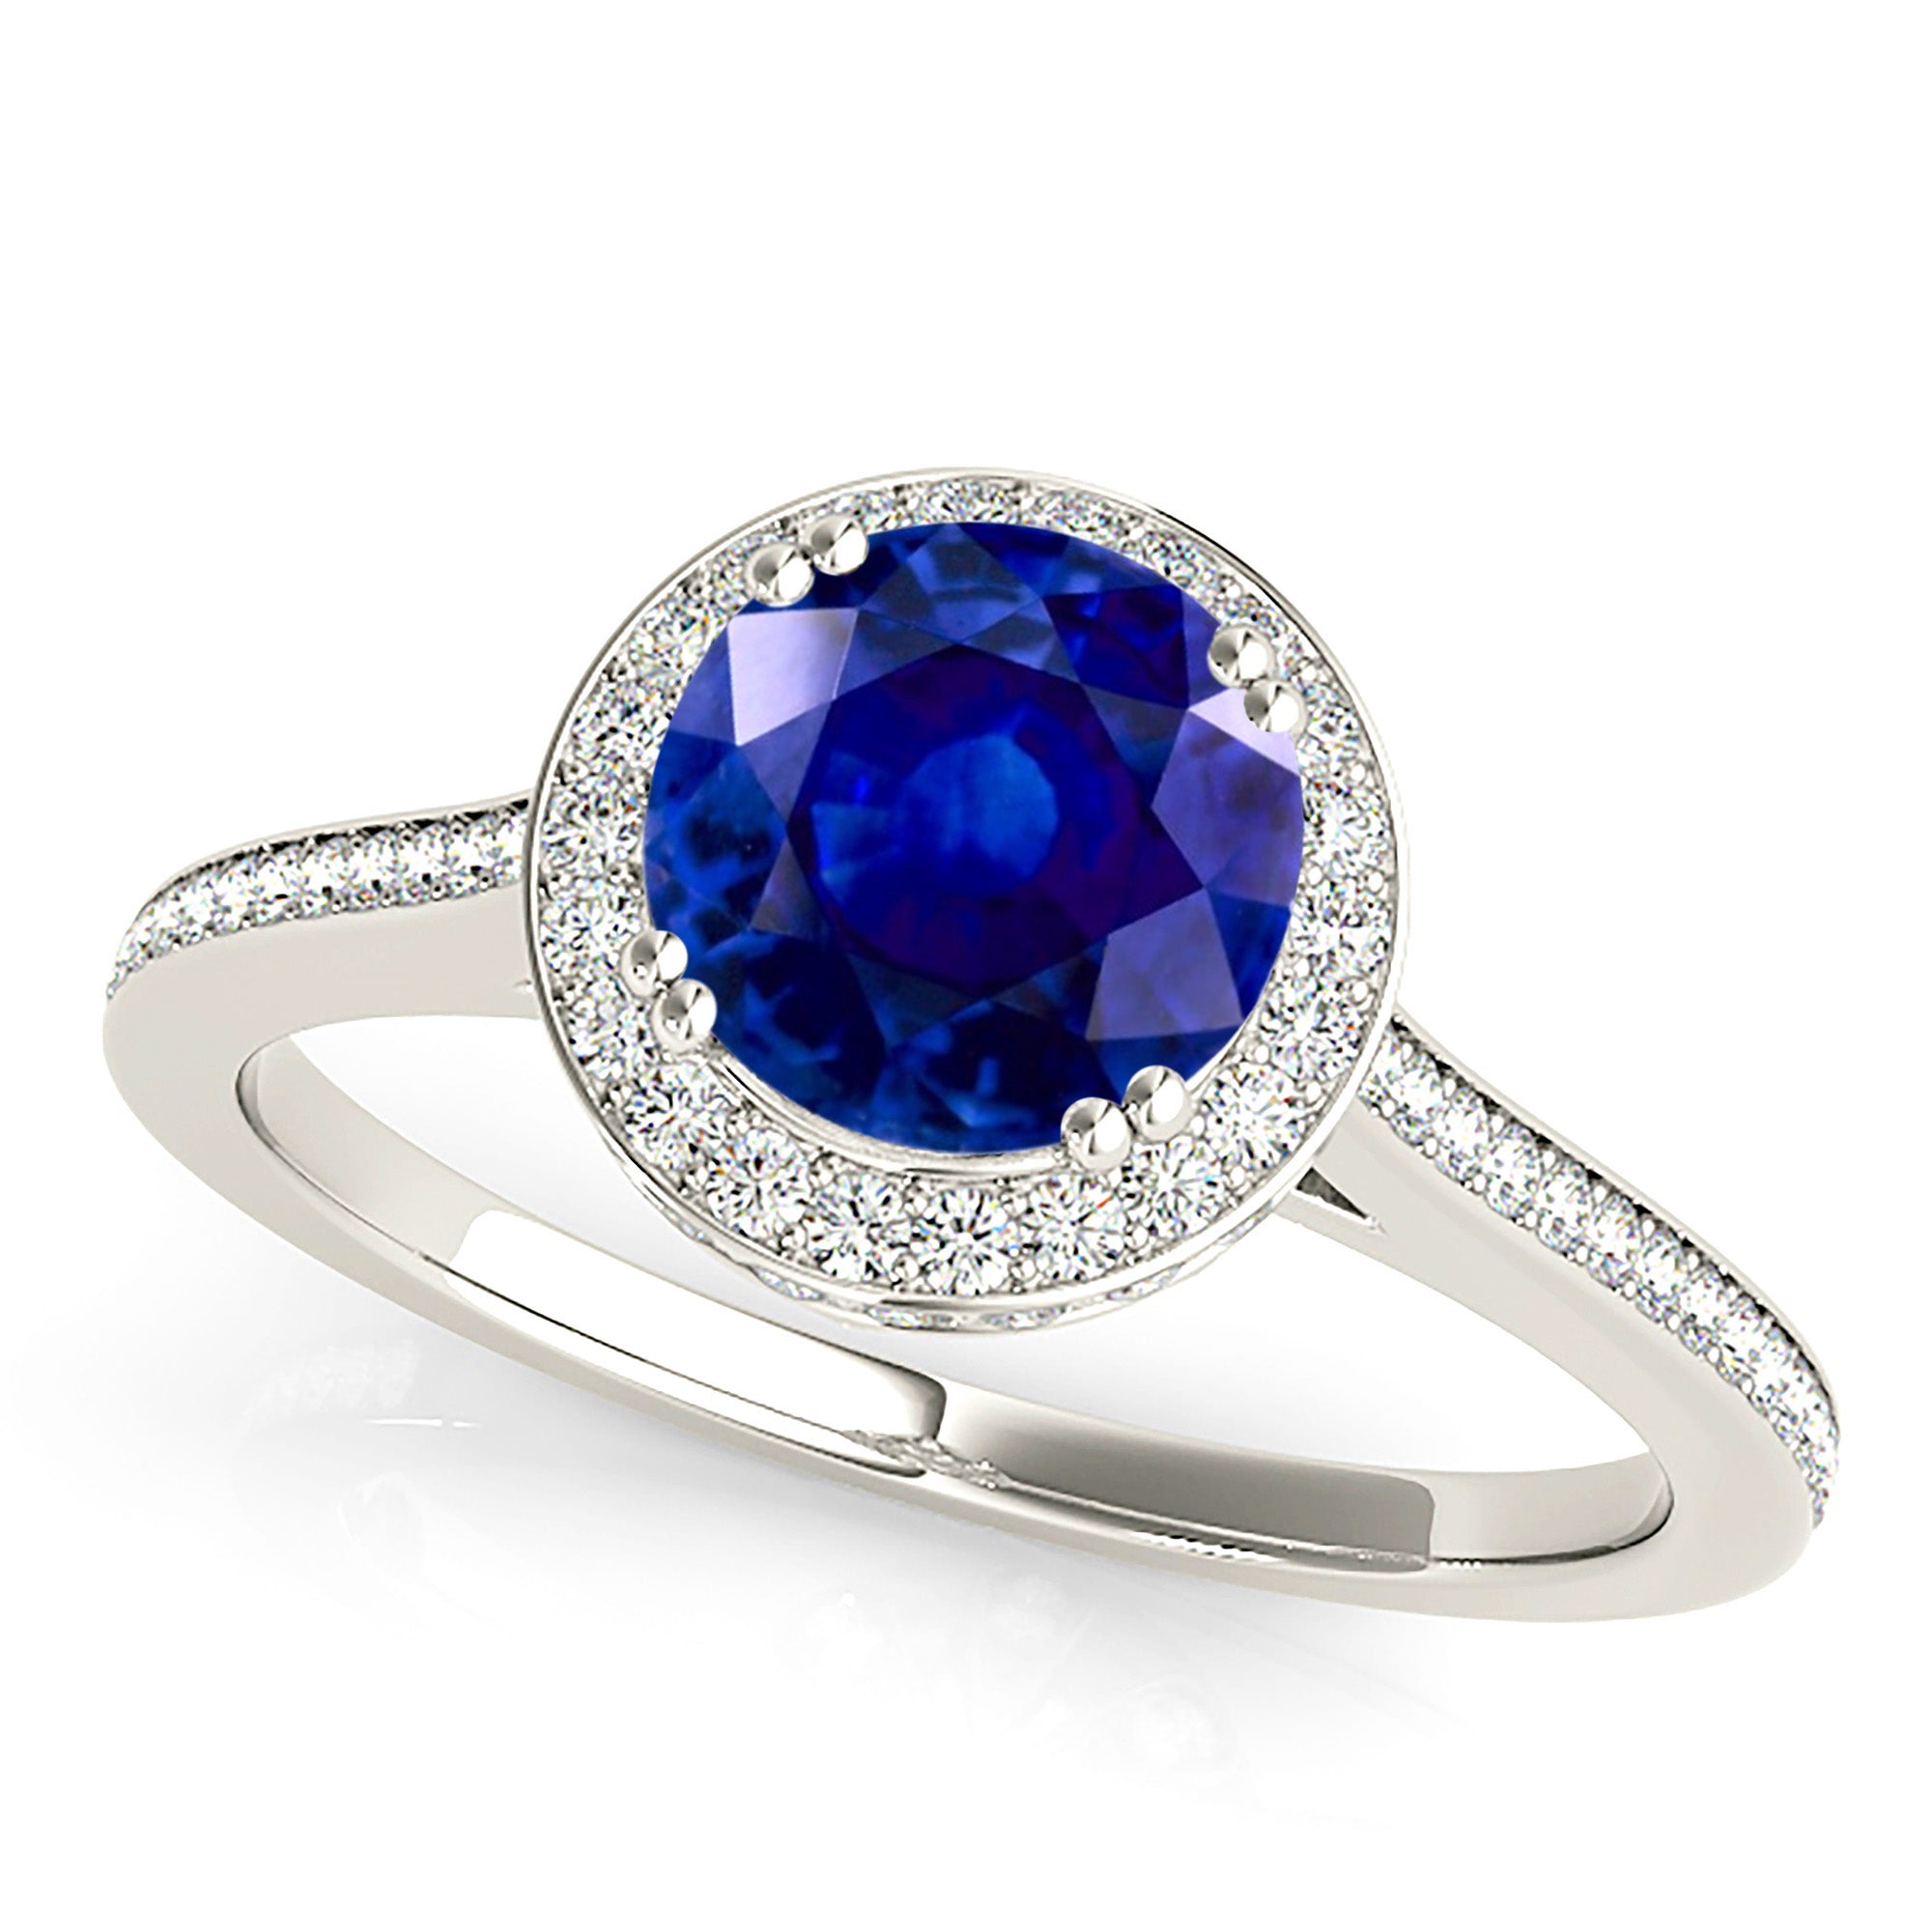 2.41 ct. Genuine Blue Sapphire Halo Ring with 0.50 ctw. Side Diamonds-in 14K/18K White, Yellow, Rose Gold and Platinum - Christmas Jewelry Gift -VIRABYANI